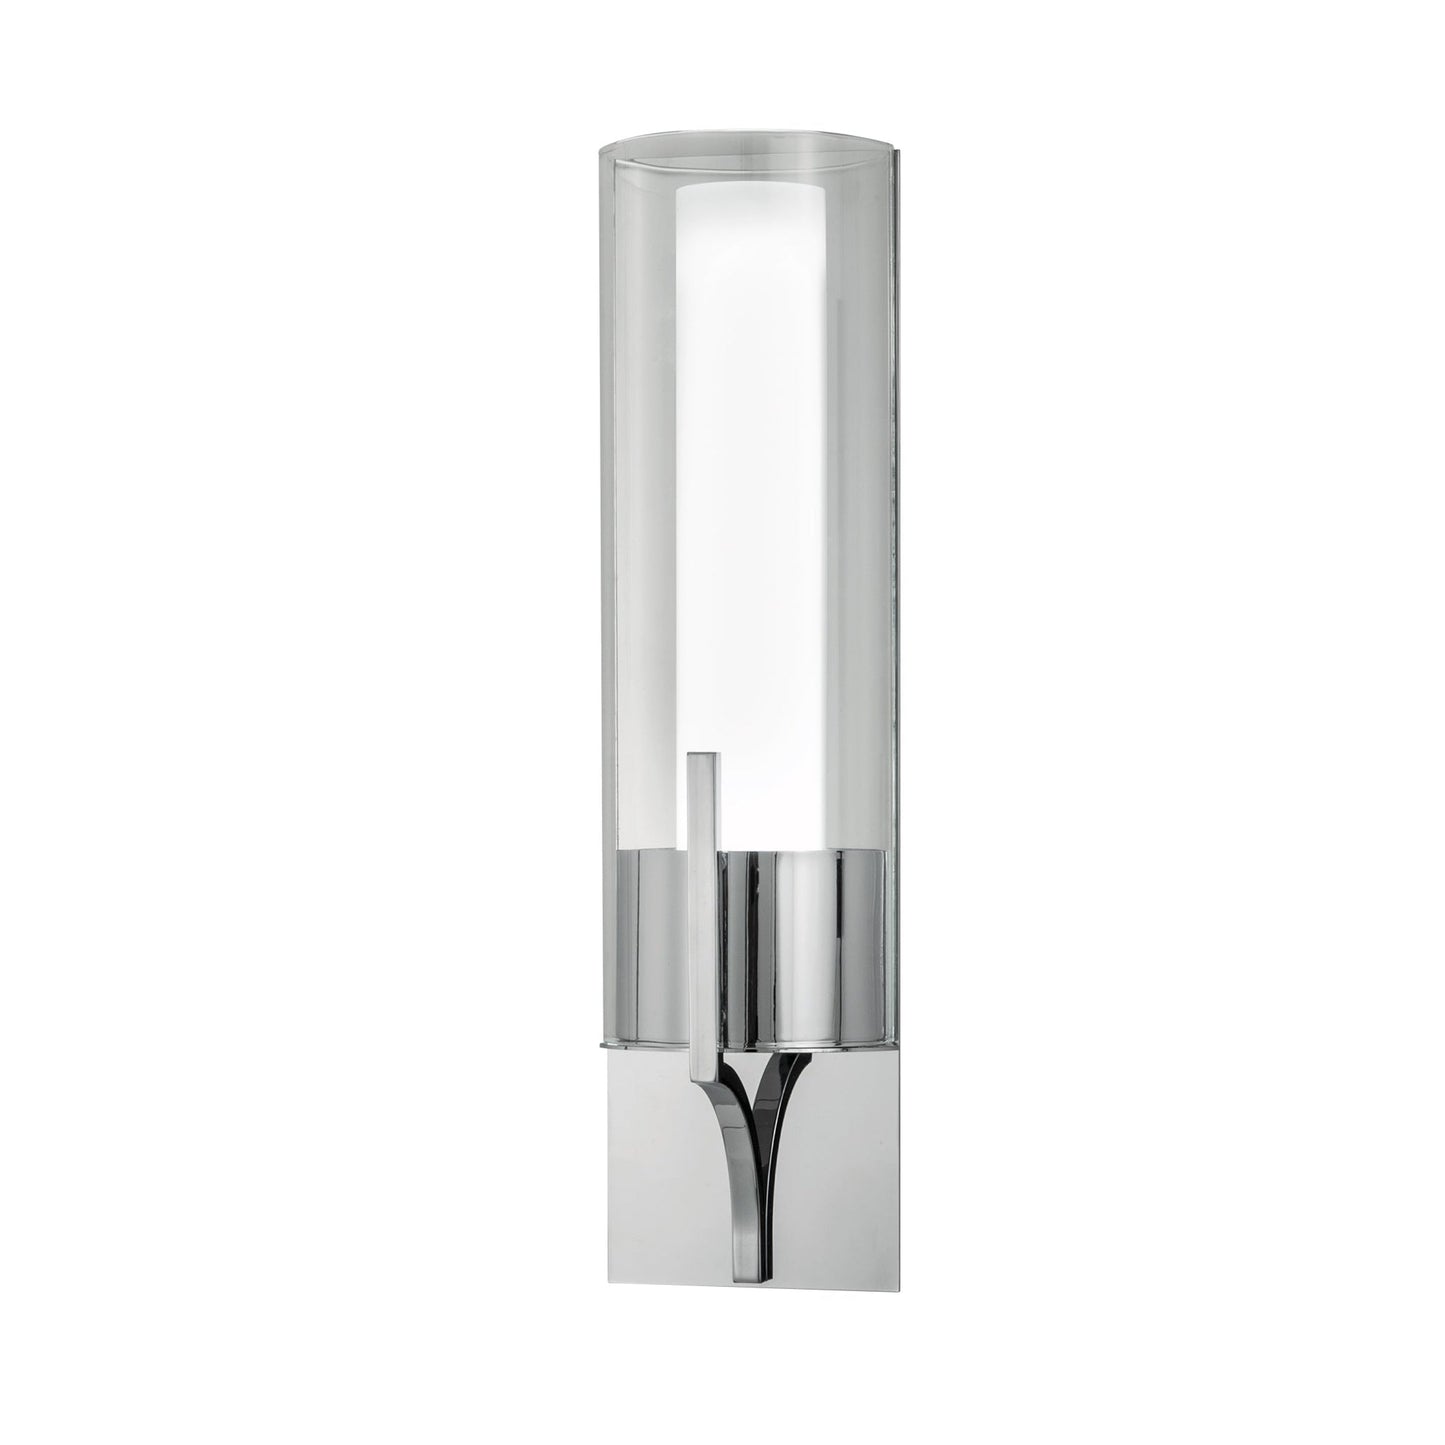 Norwell Lighting Slope 15" x 4" 1-Light Chrome Vanity Light With Clear Glass Diffuser